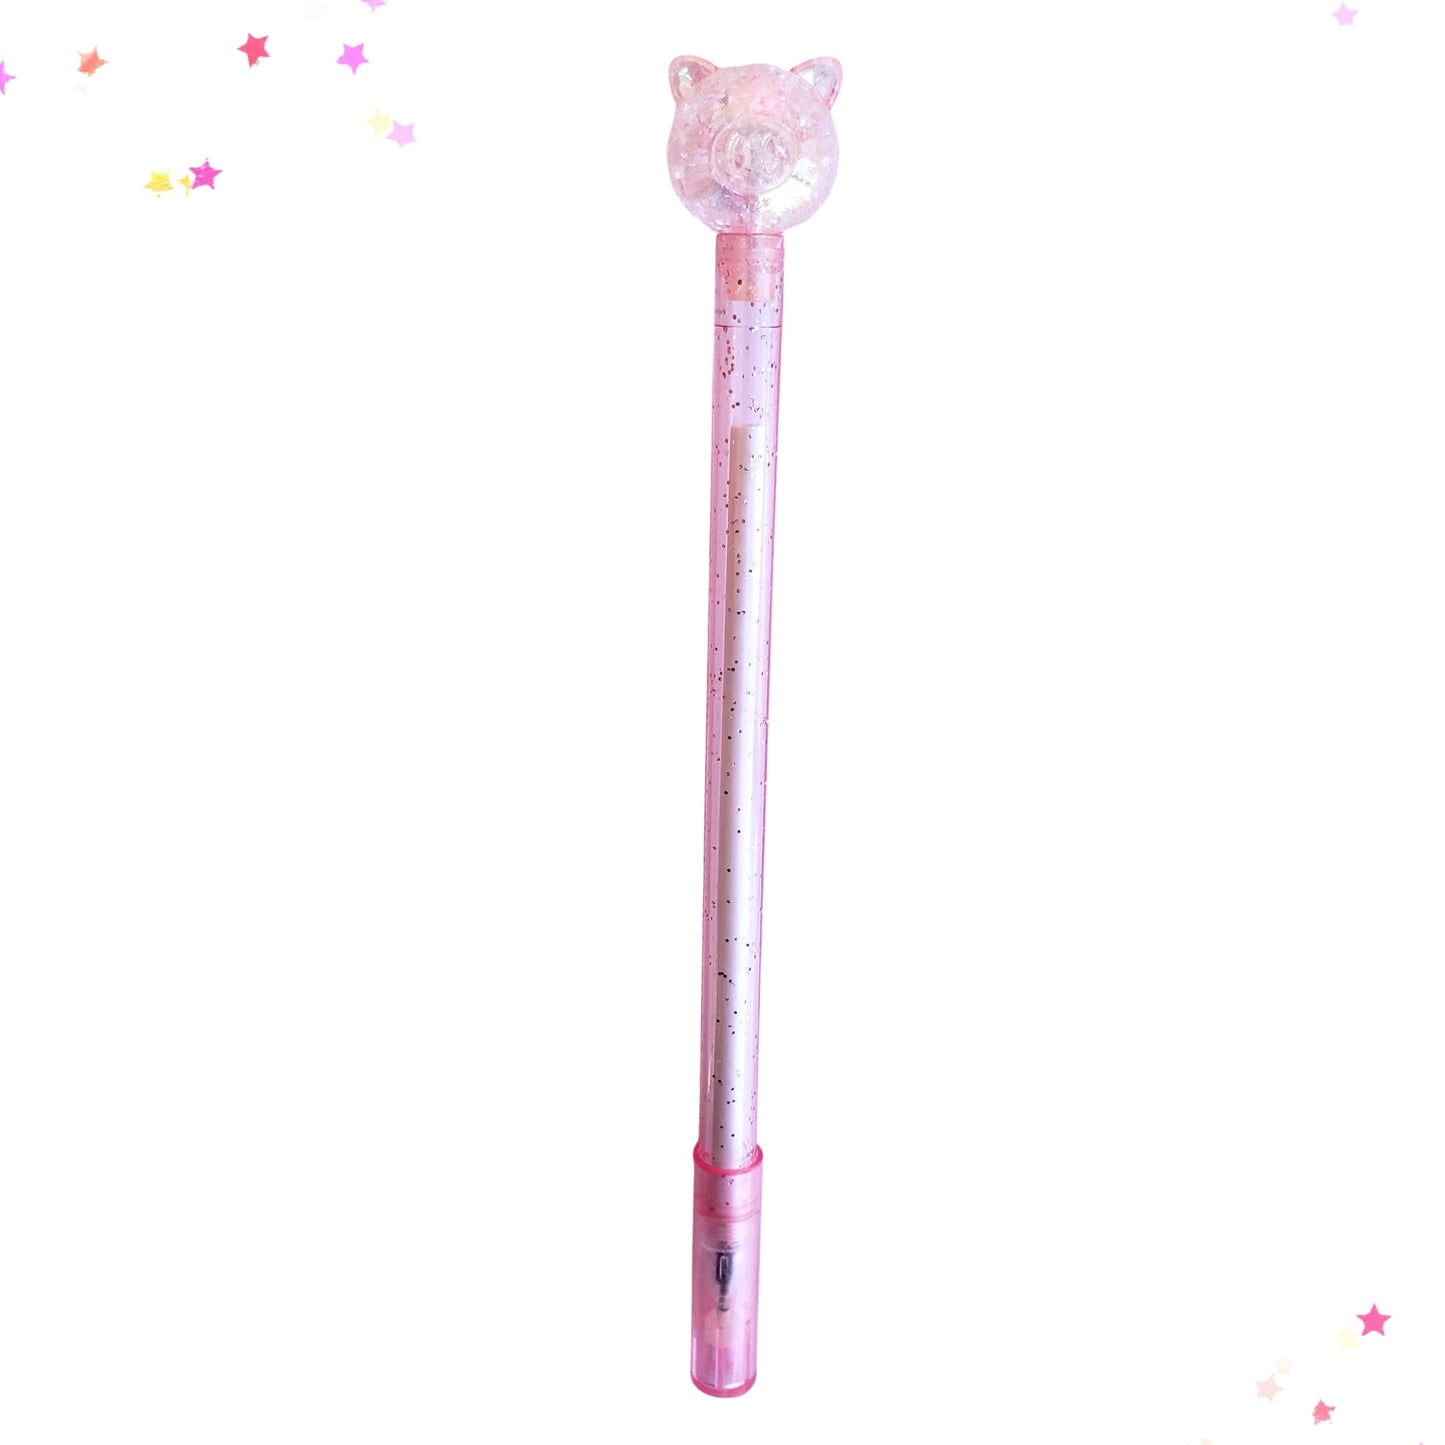 Glittery Pink Pig Pen from Confetti Kitty, Only 2.99